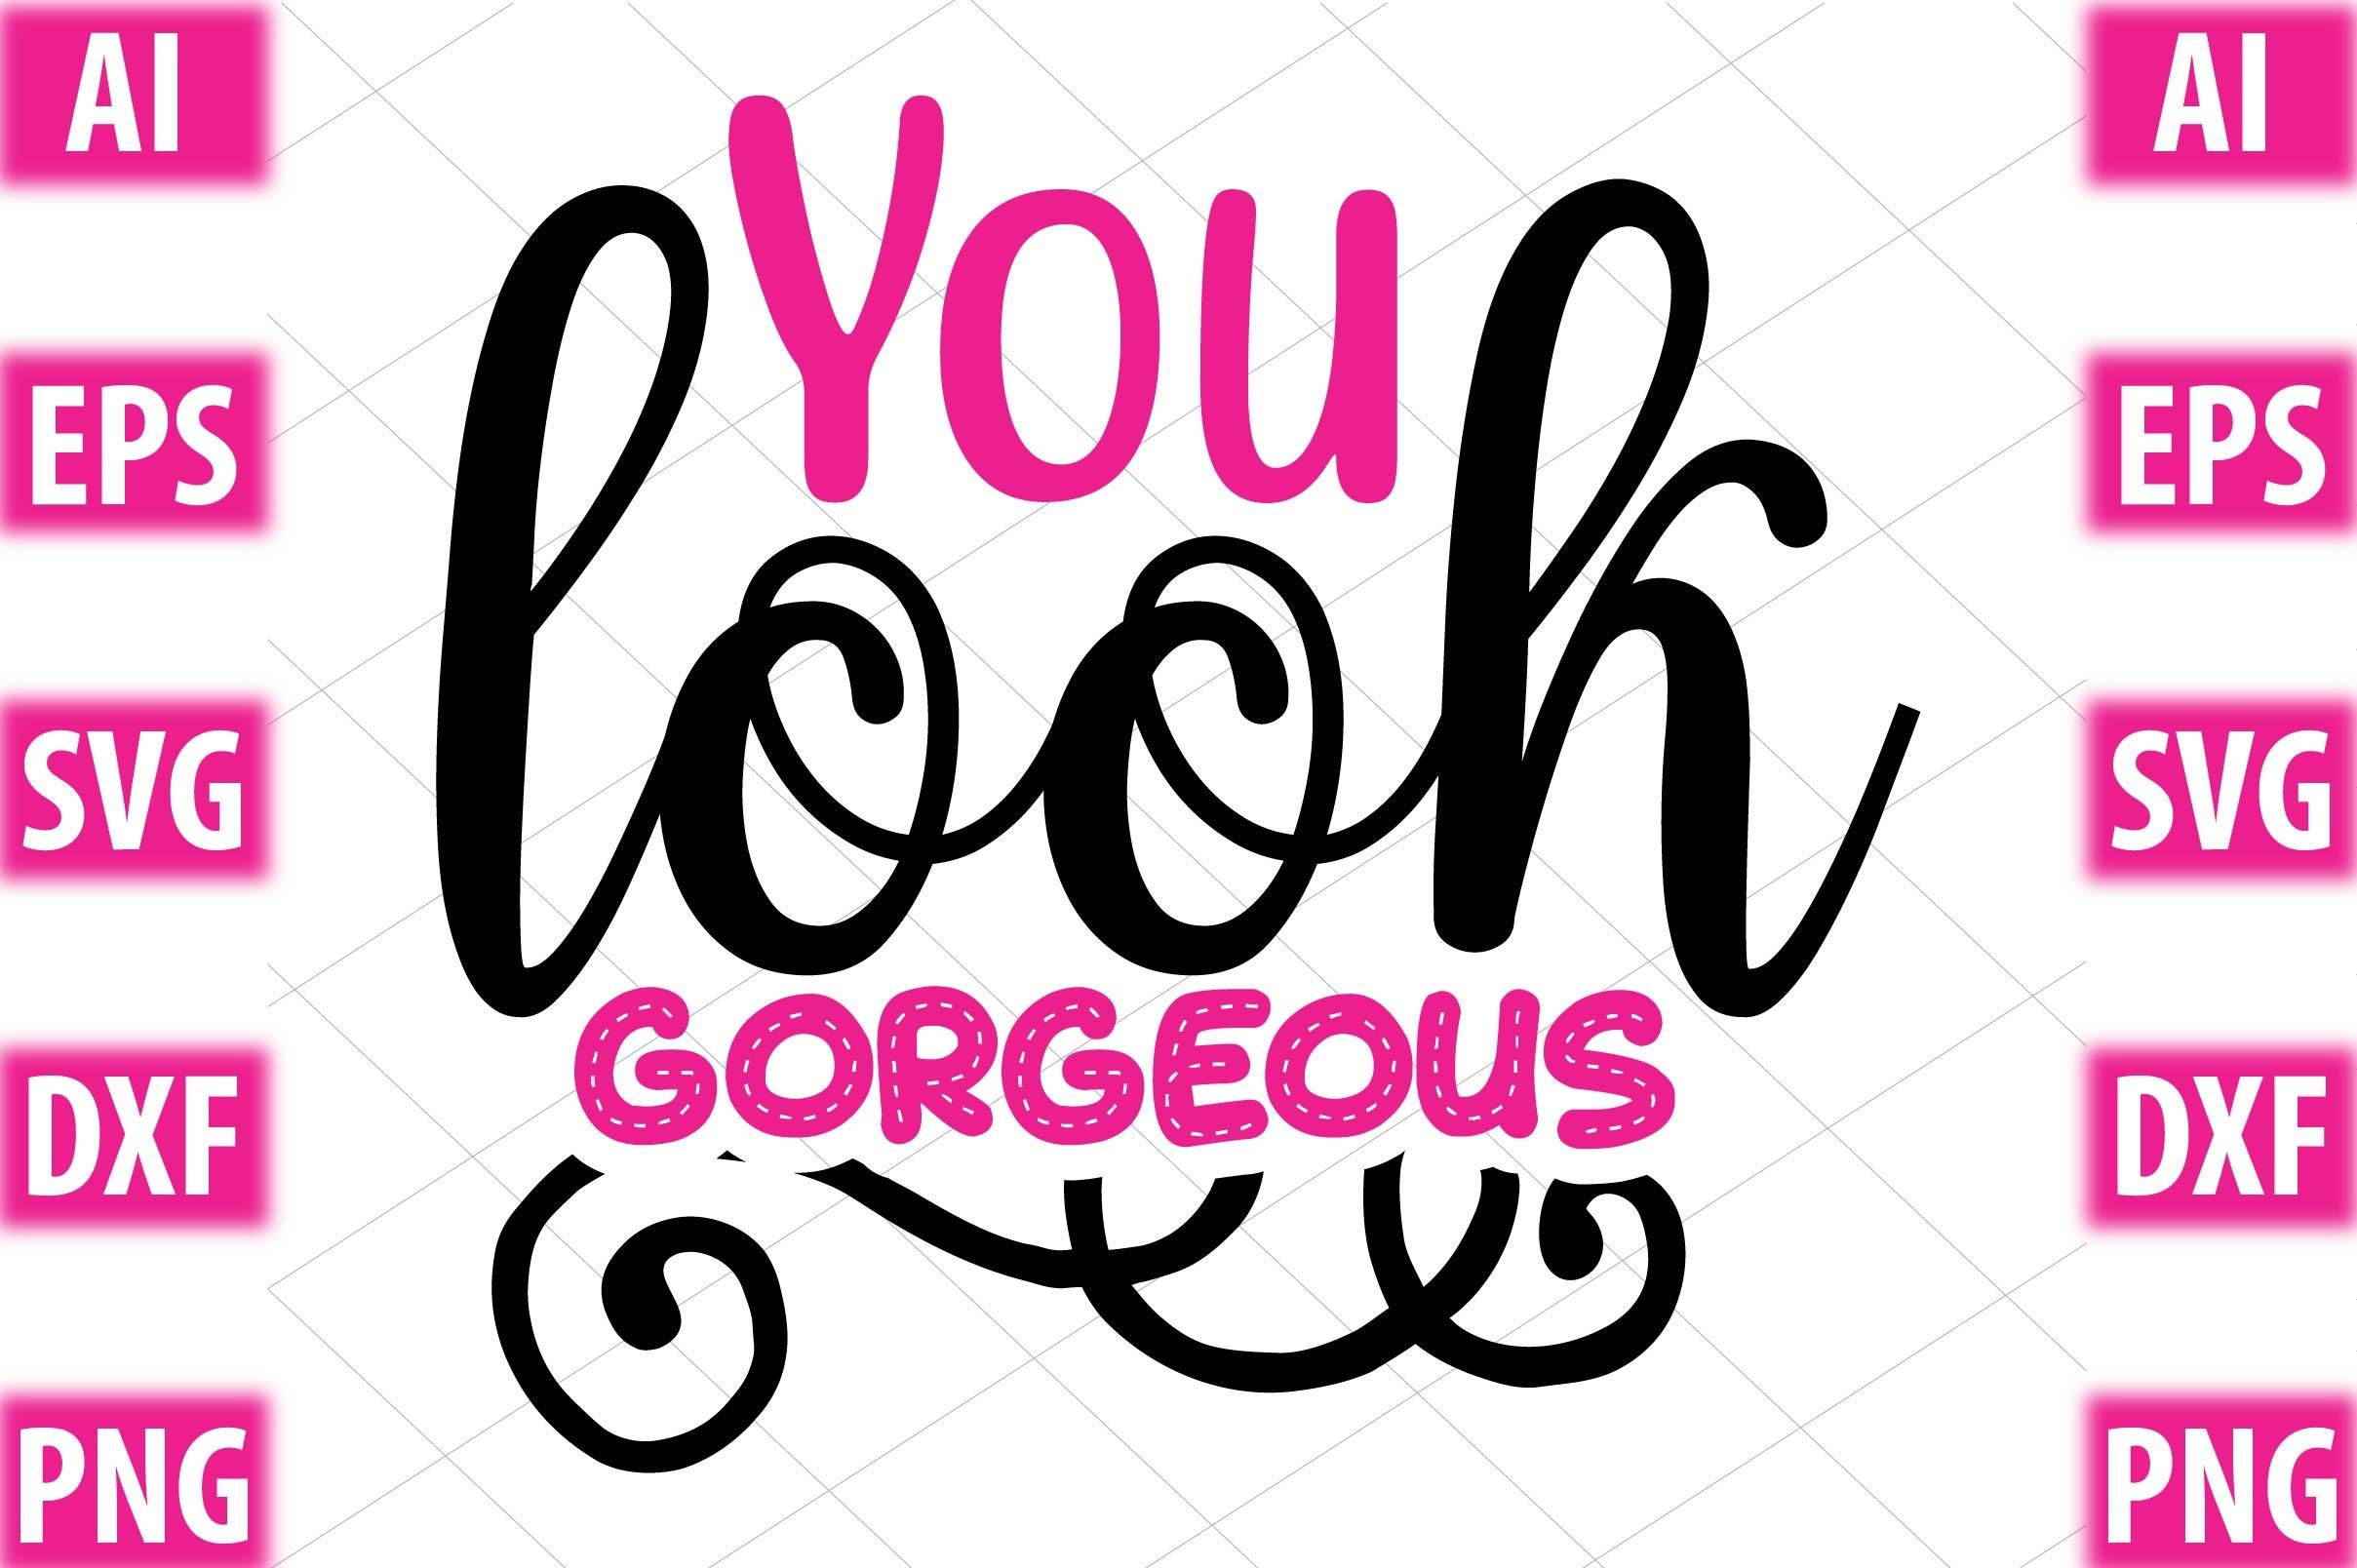 You Look Gorgeous